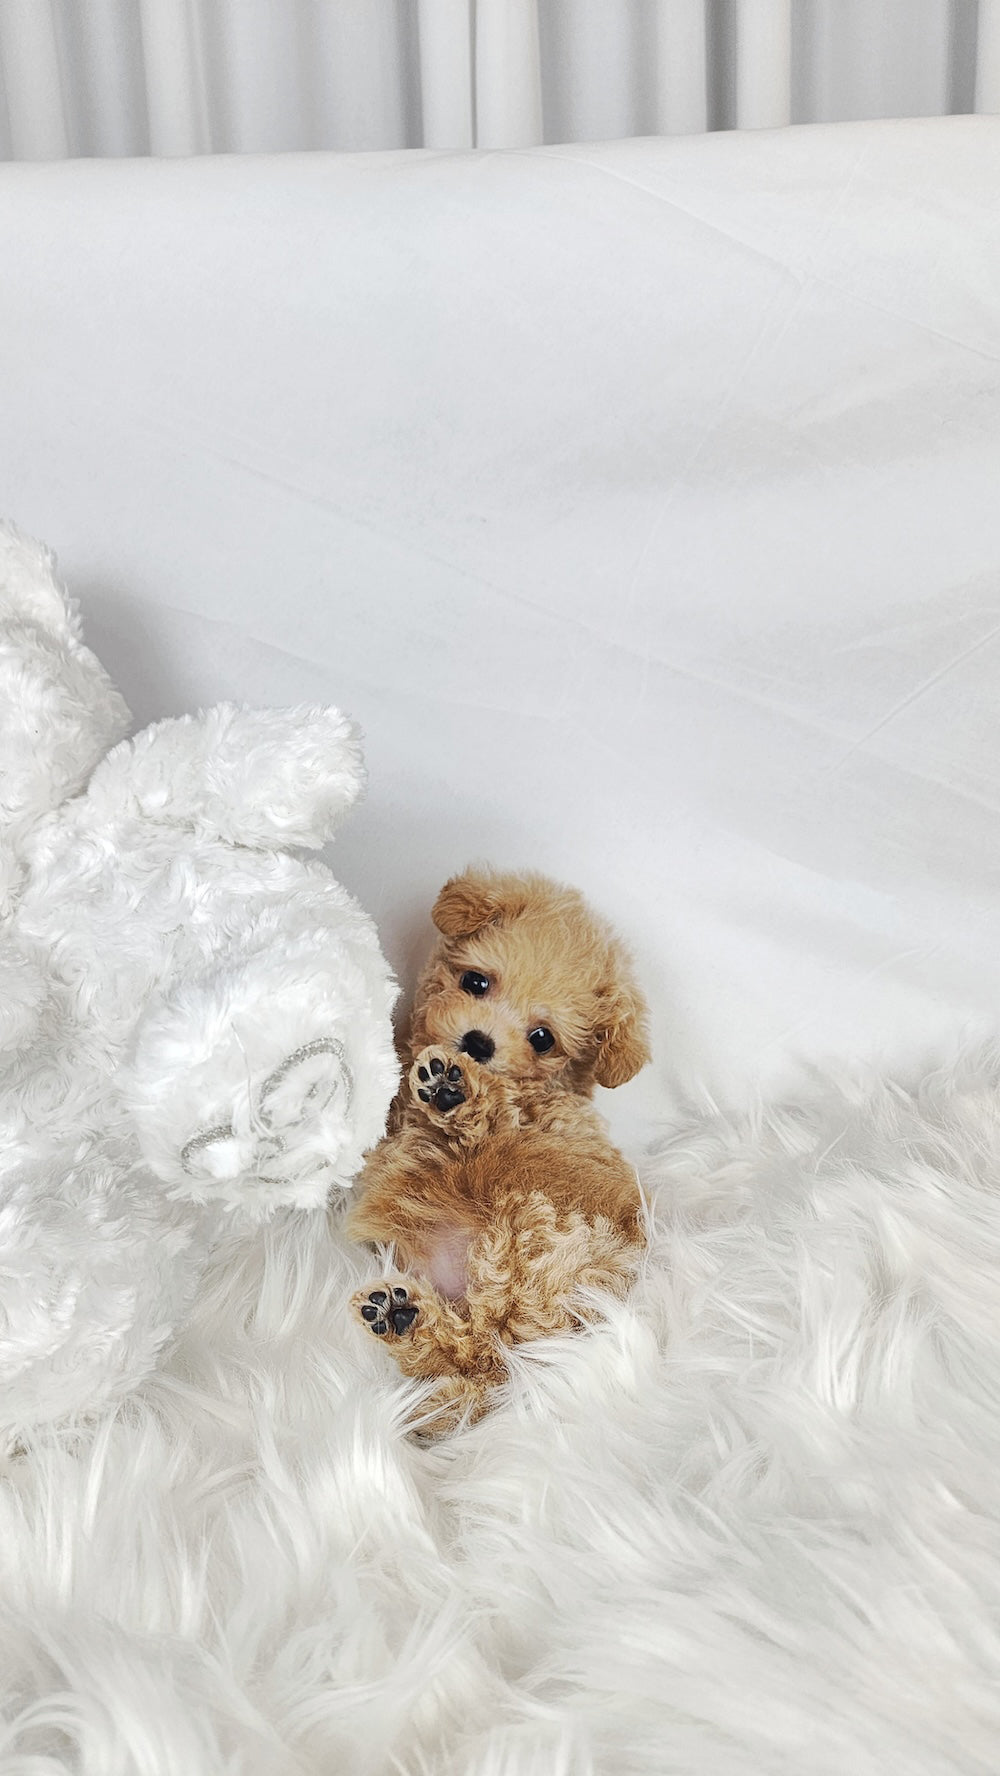 Lucy - Poodle Girl